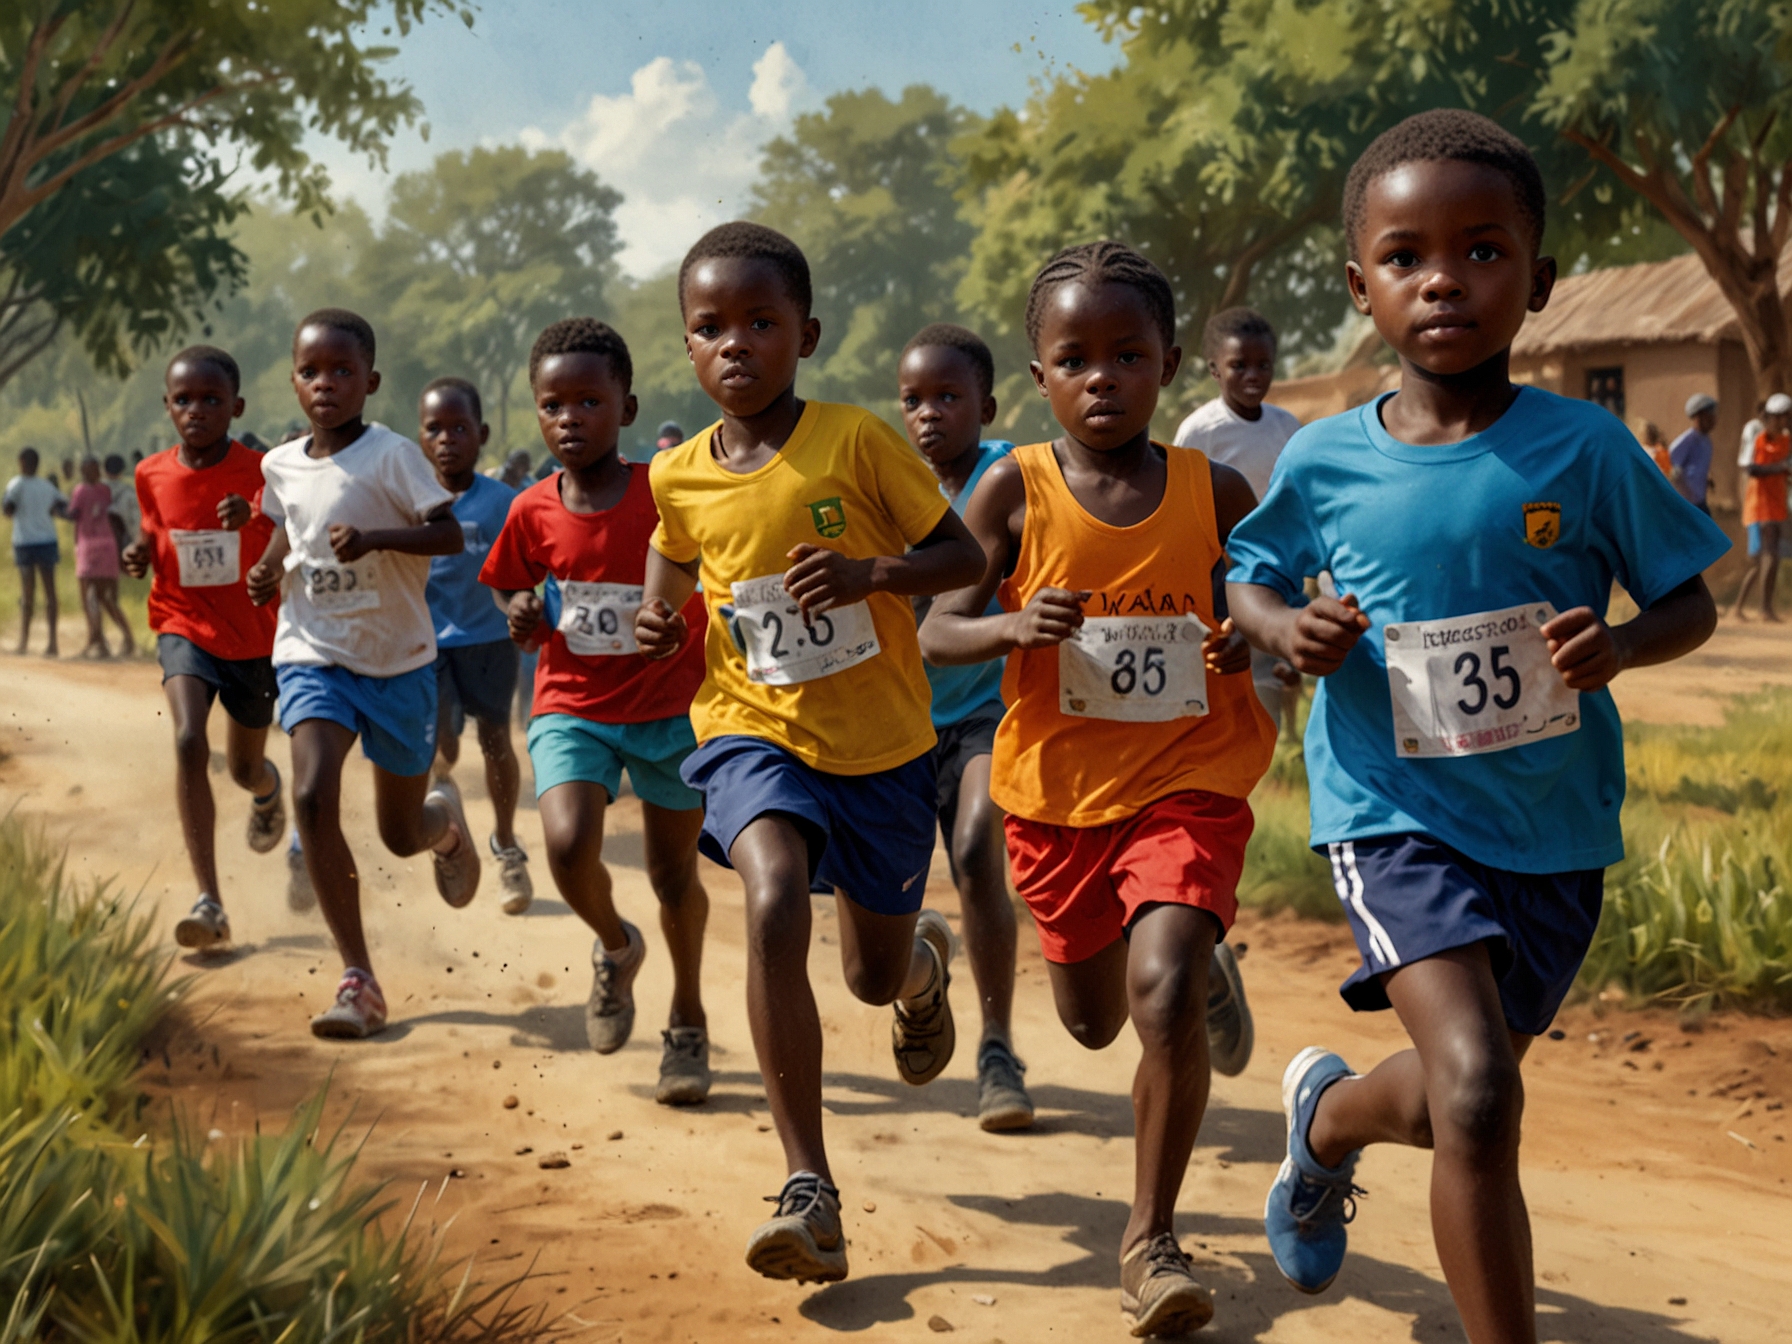 Children in East African communities engaging in daily long-distance running routines, illustrating the cultural foundation and early training that contribute to their future ultra-marathon success.